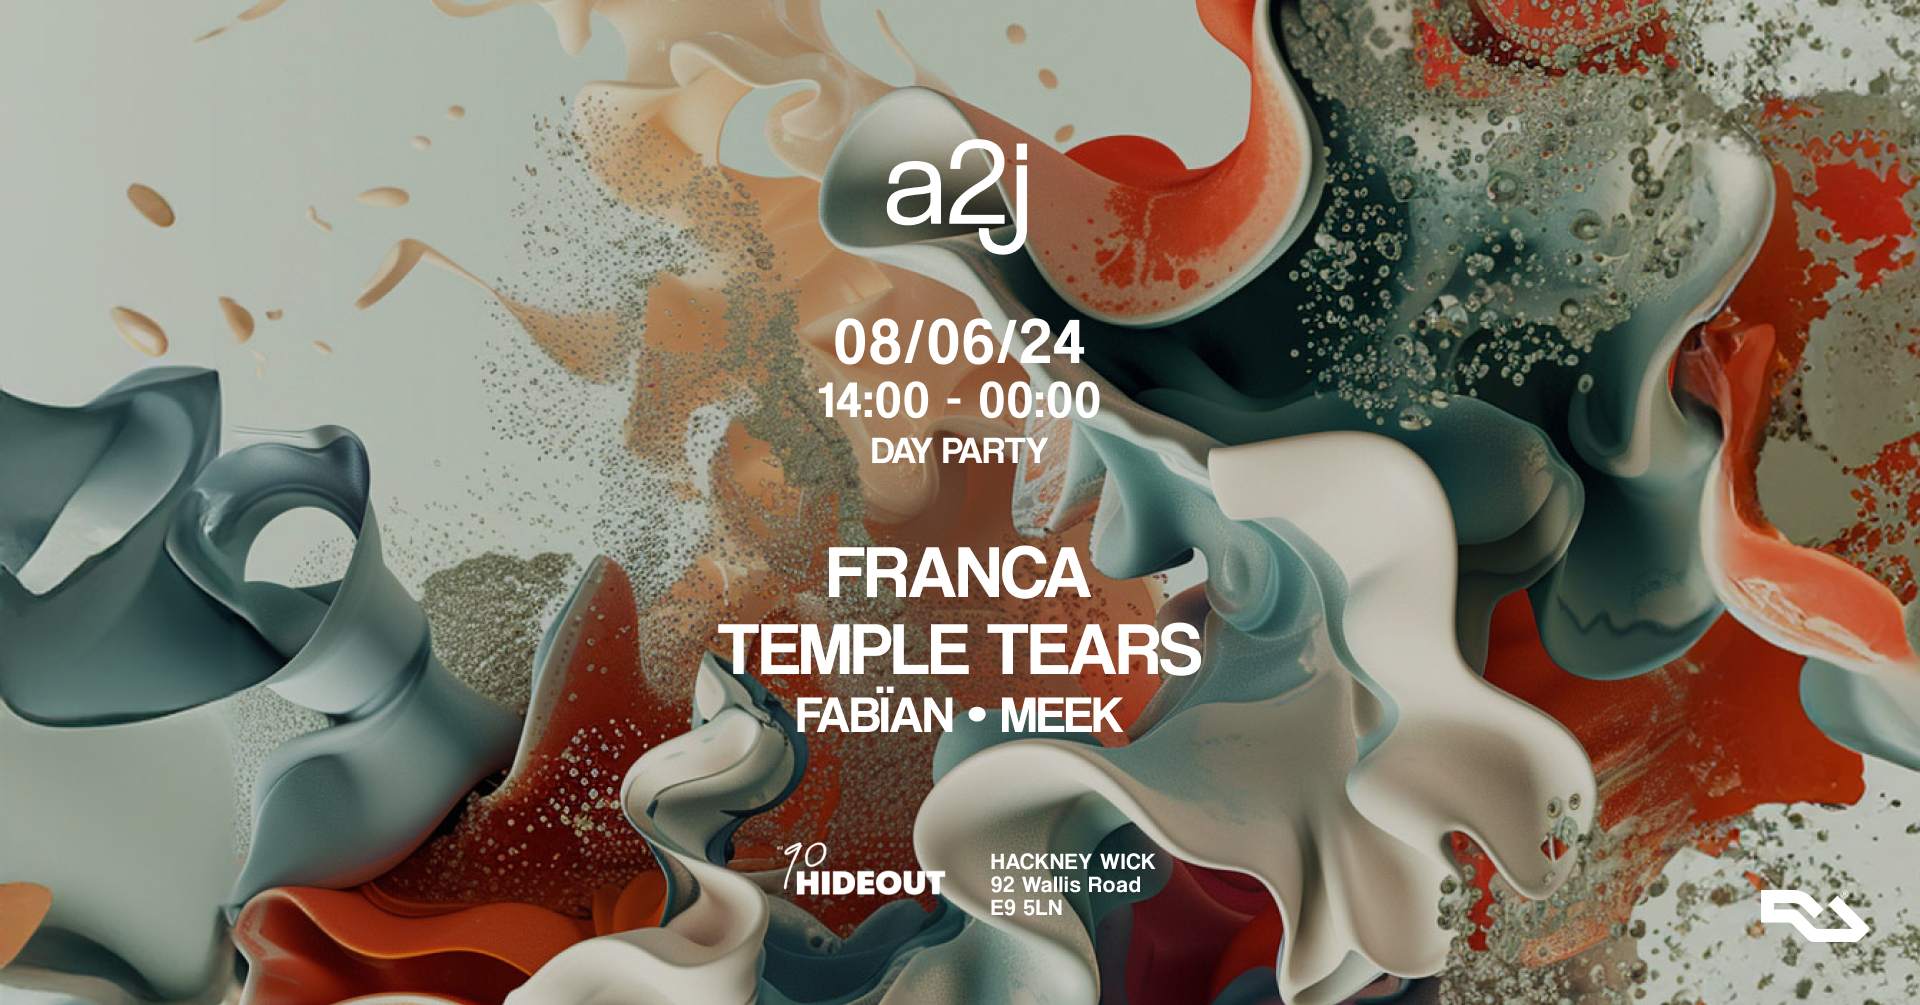 a2j w/Franca & Temple Tears - フライヤー表